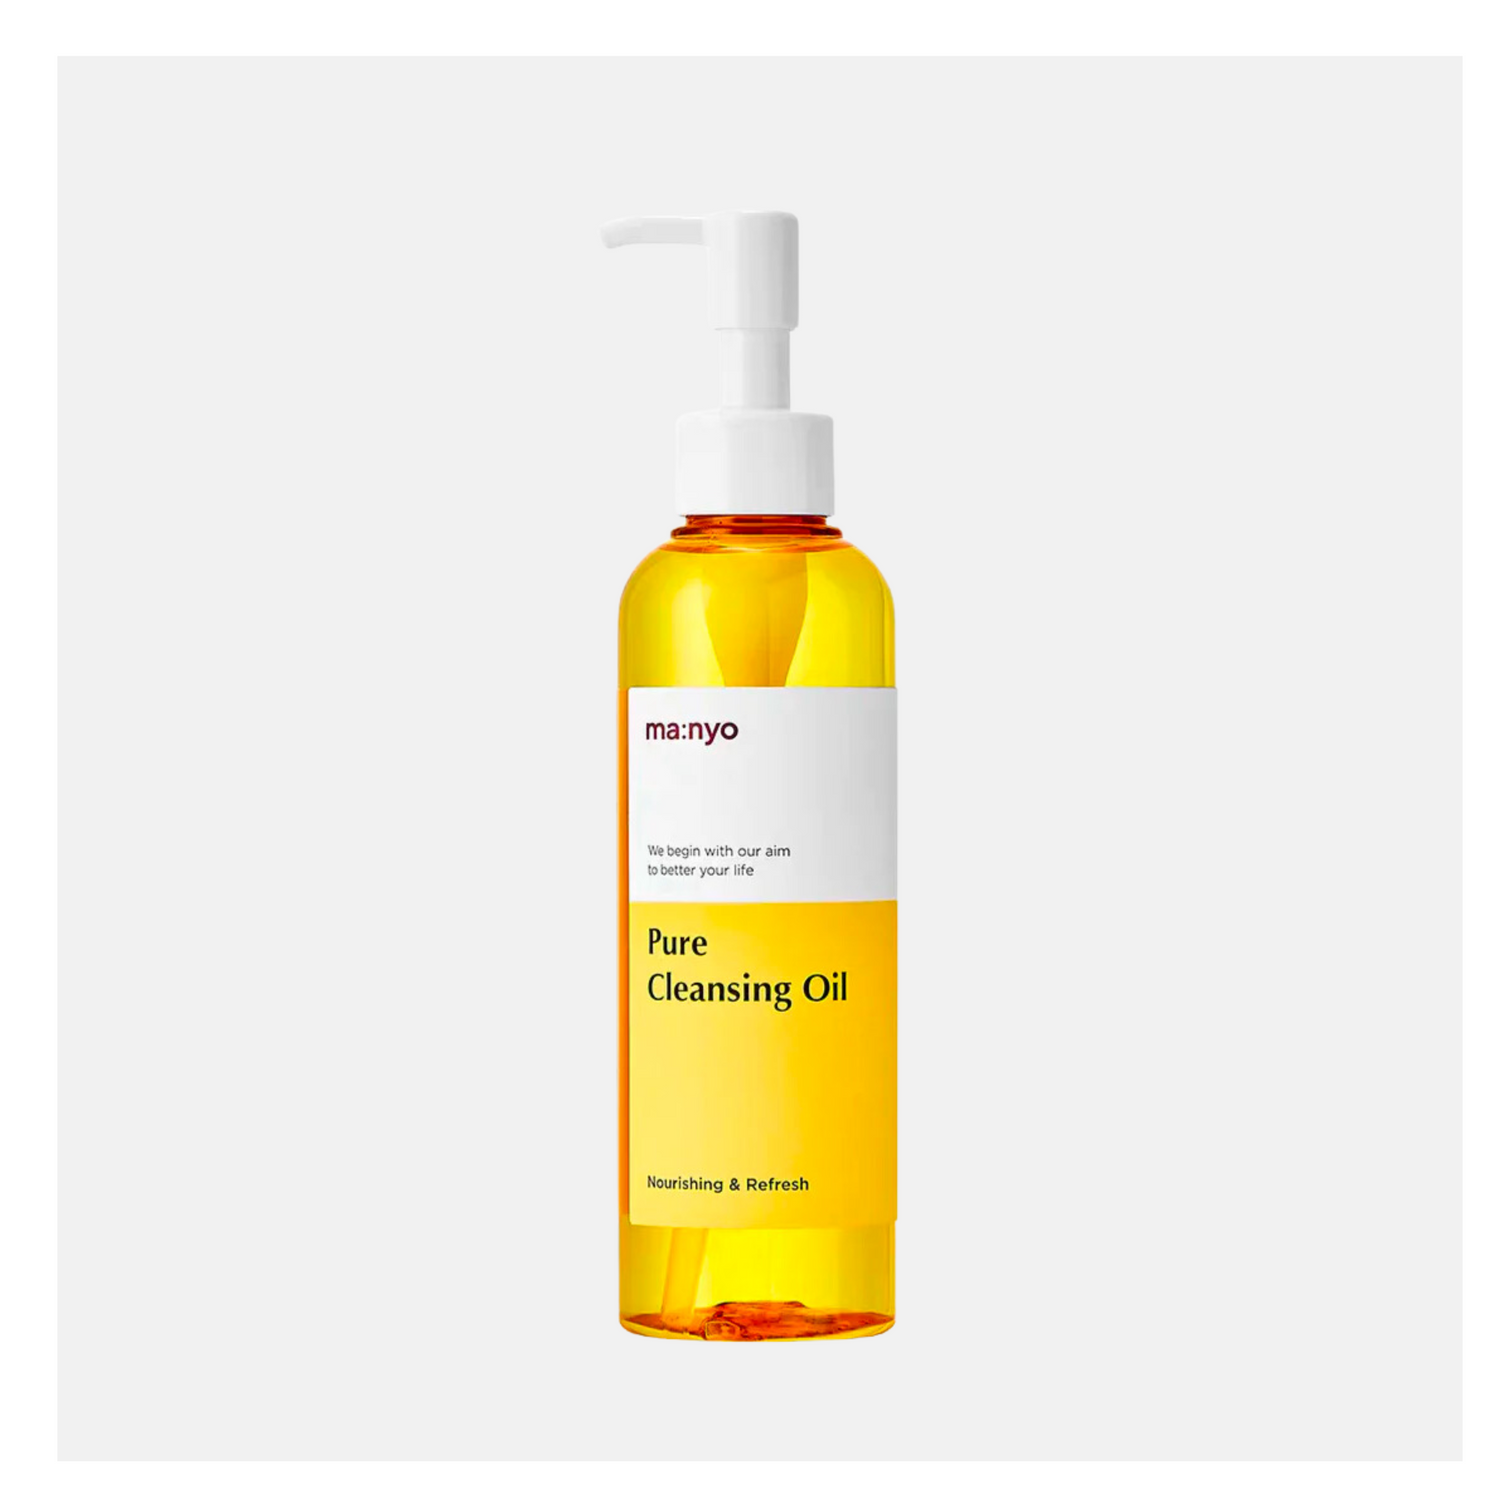 Ma:nyo Pure Cleansing Oil, 200ml